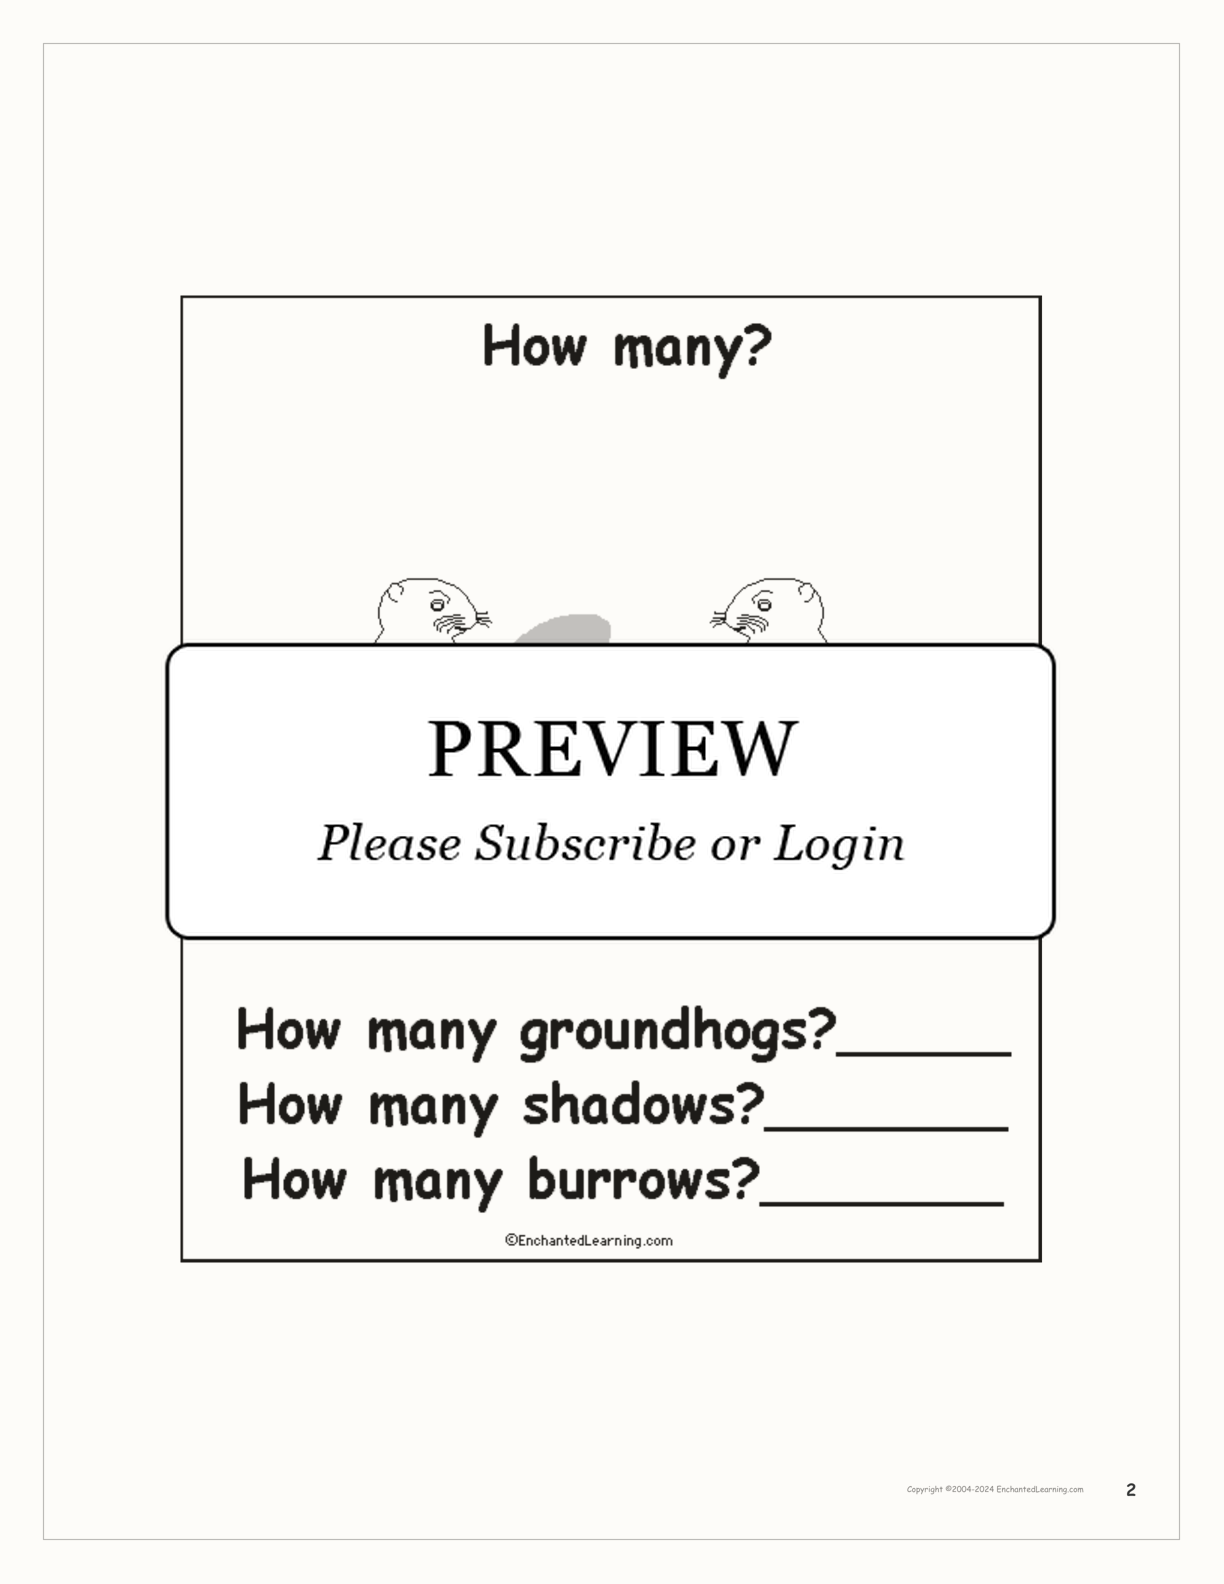 'Groundhog Day: How Many?' interactive worksheet page 2